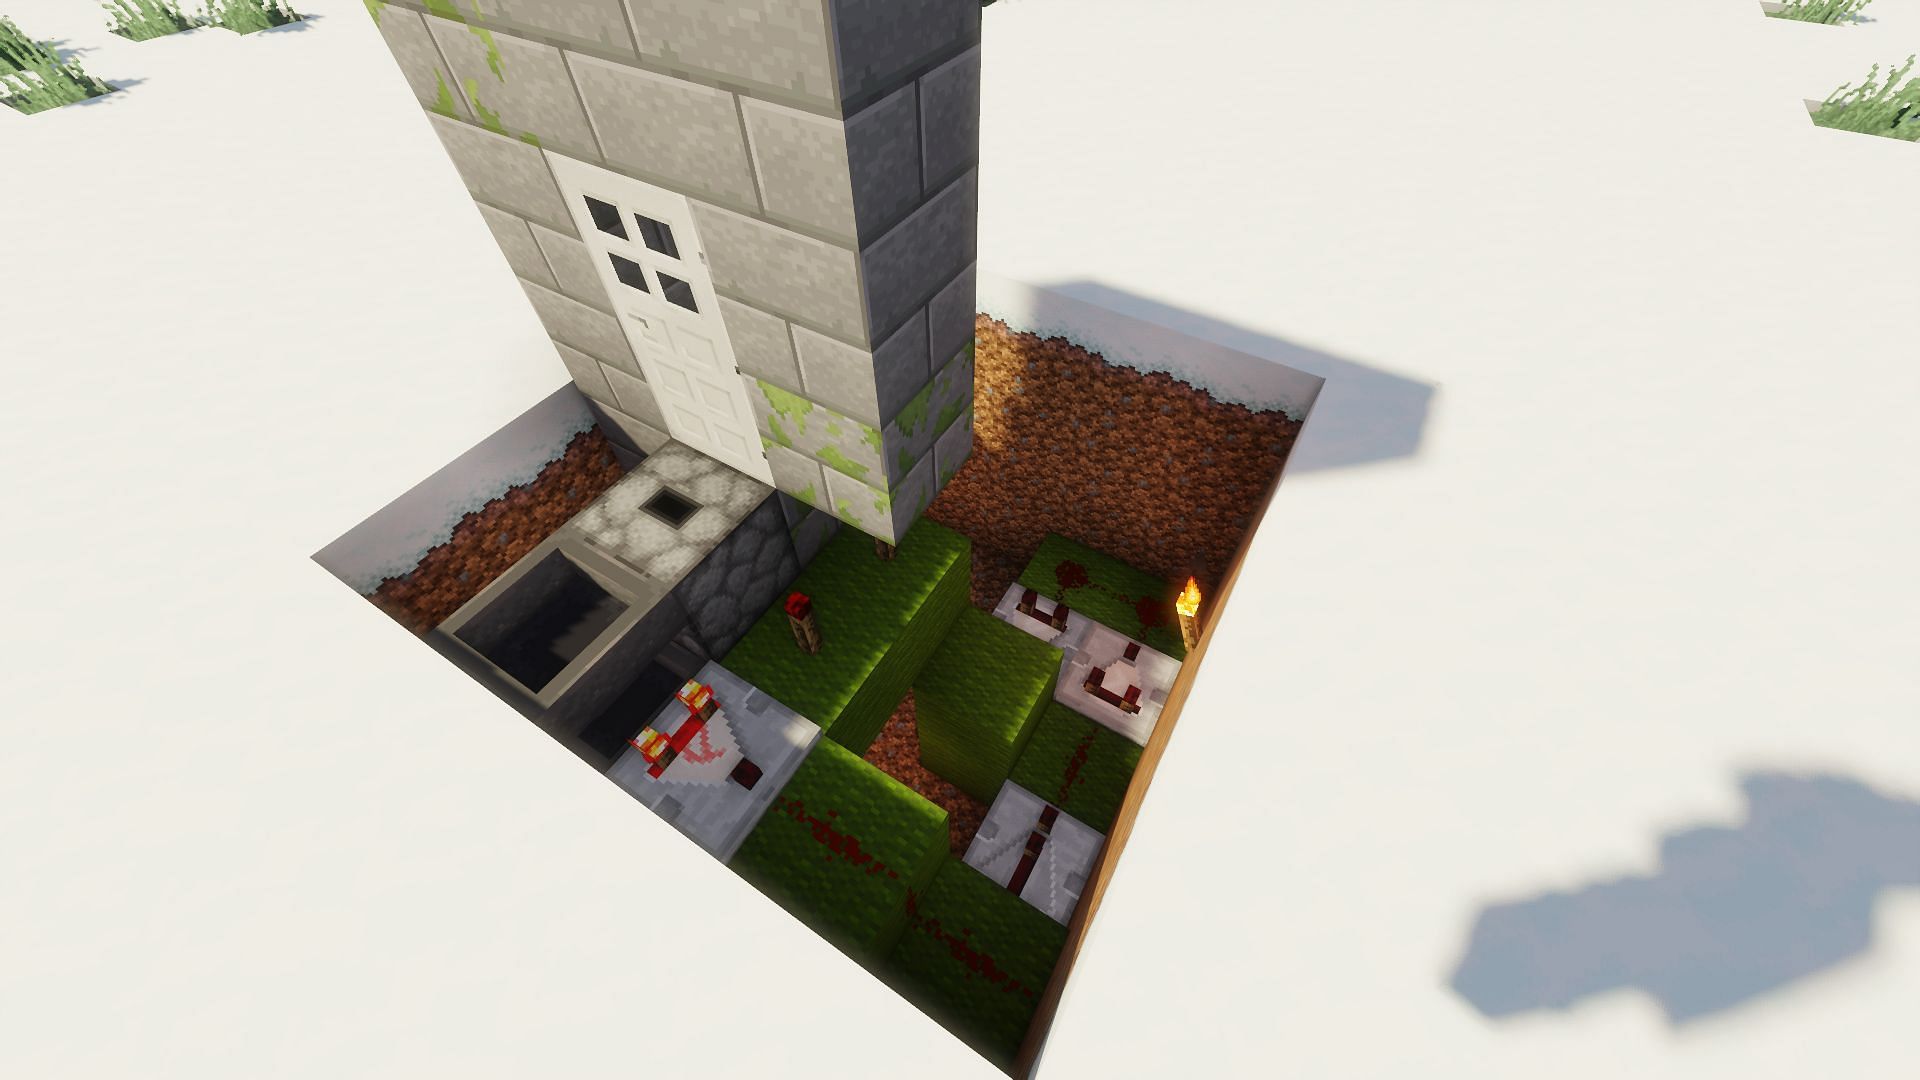 A finished redstone build, possible because of update 1.5 (Image via Minecraft)